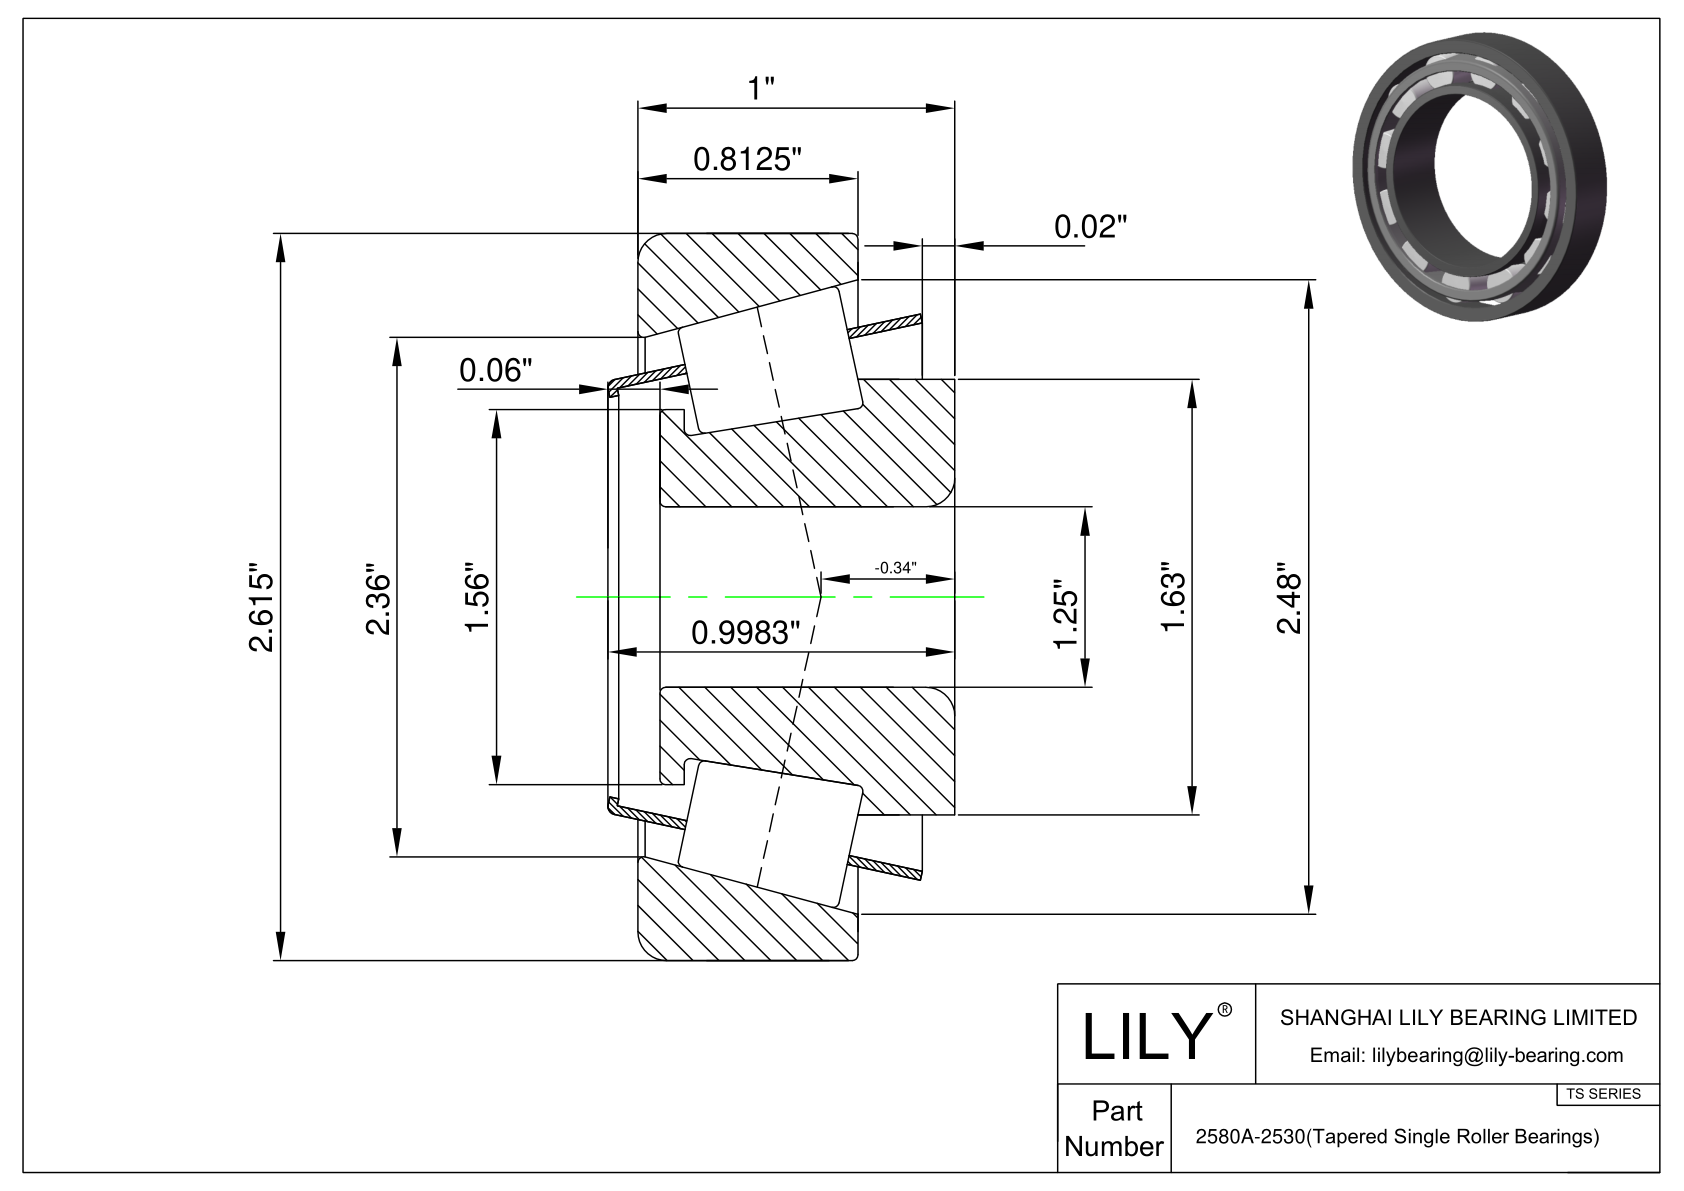 2580A-2530 TS (Tapered Single Roller Bearings) (Imperial) cad drawing